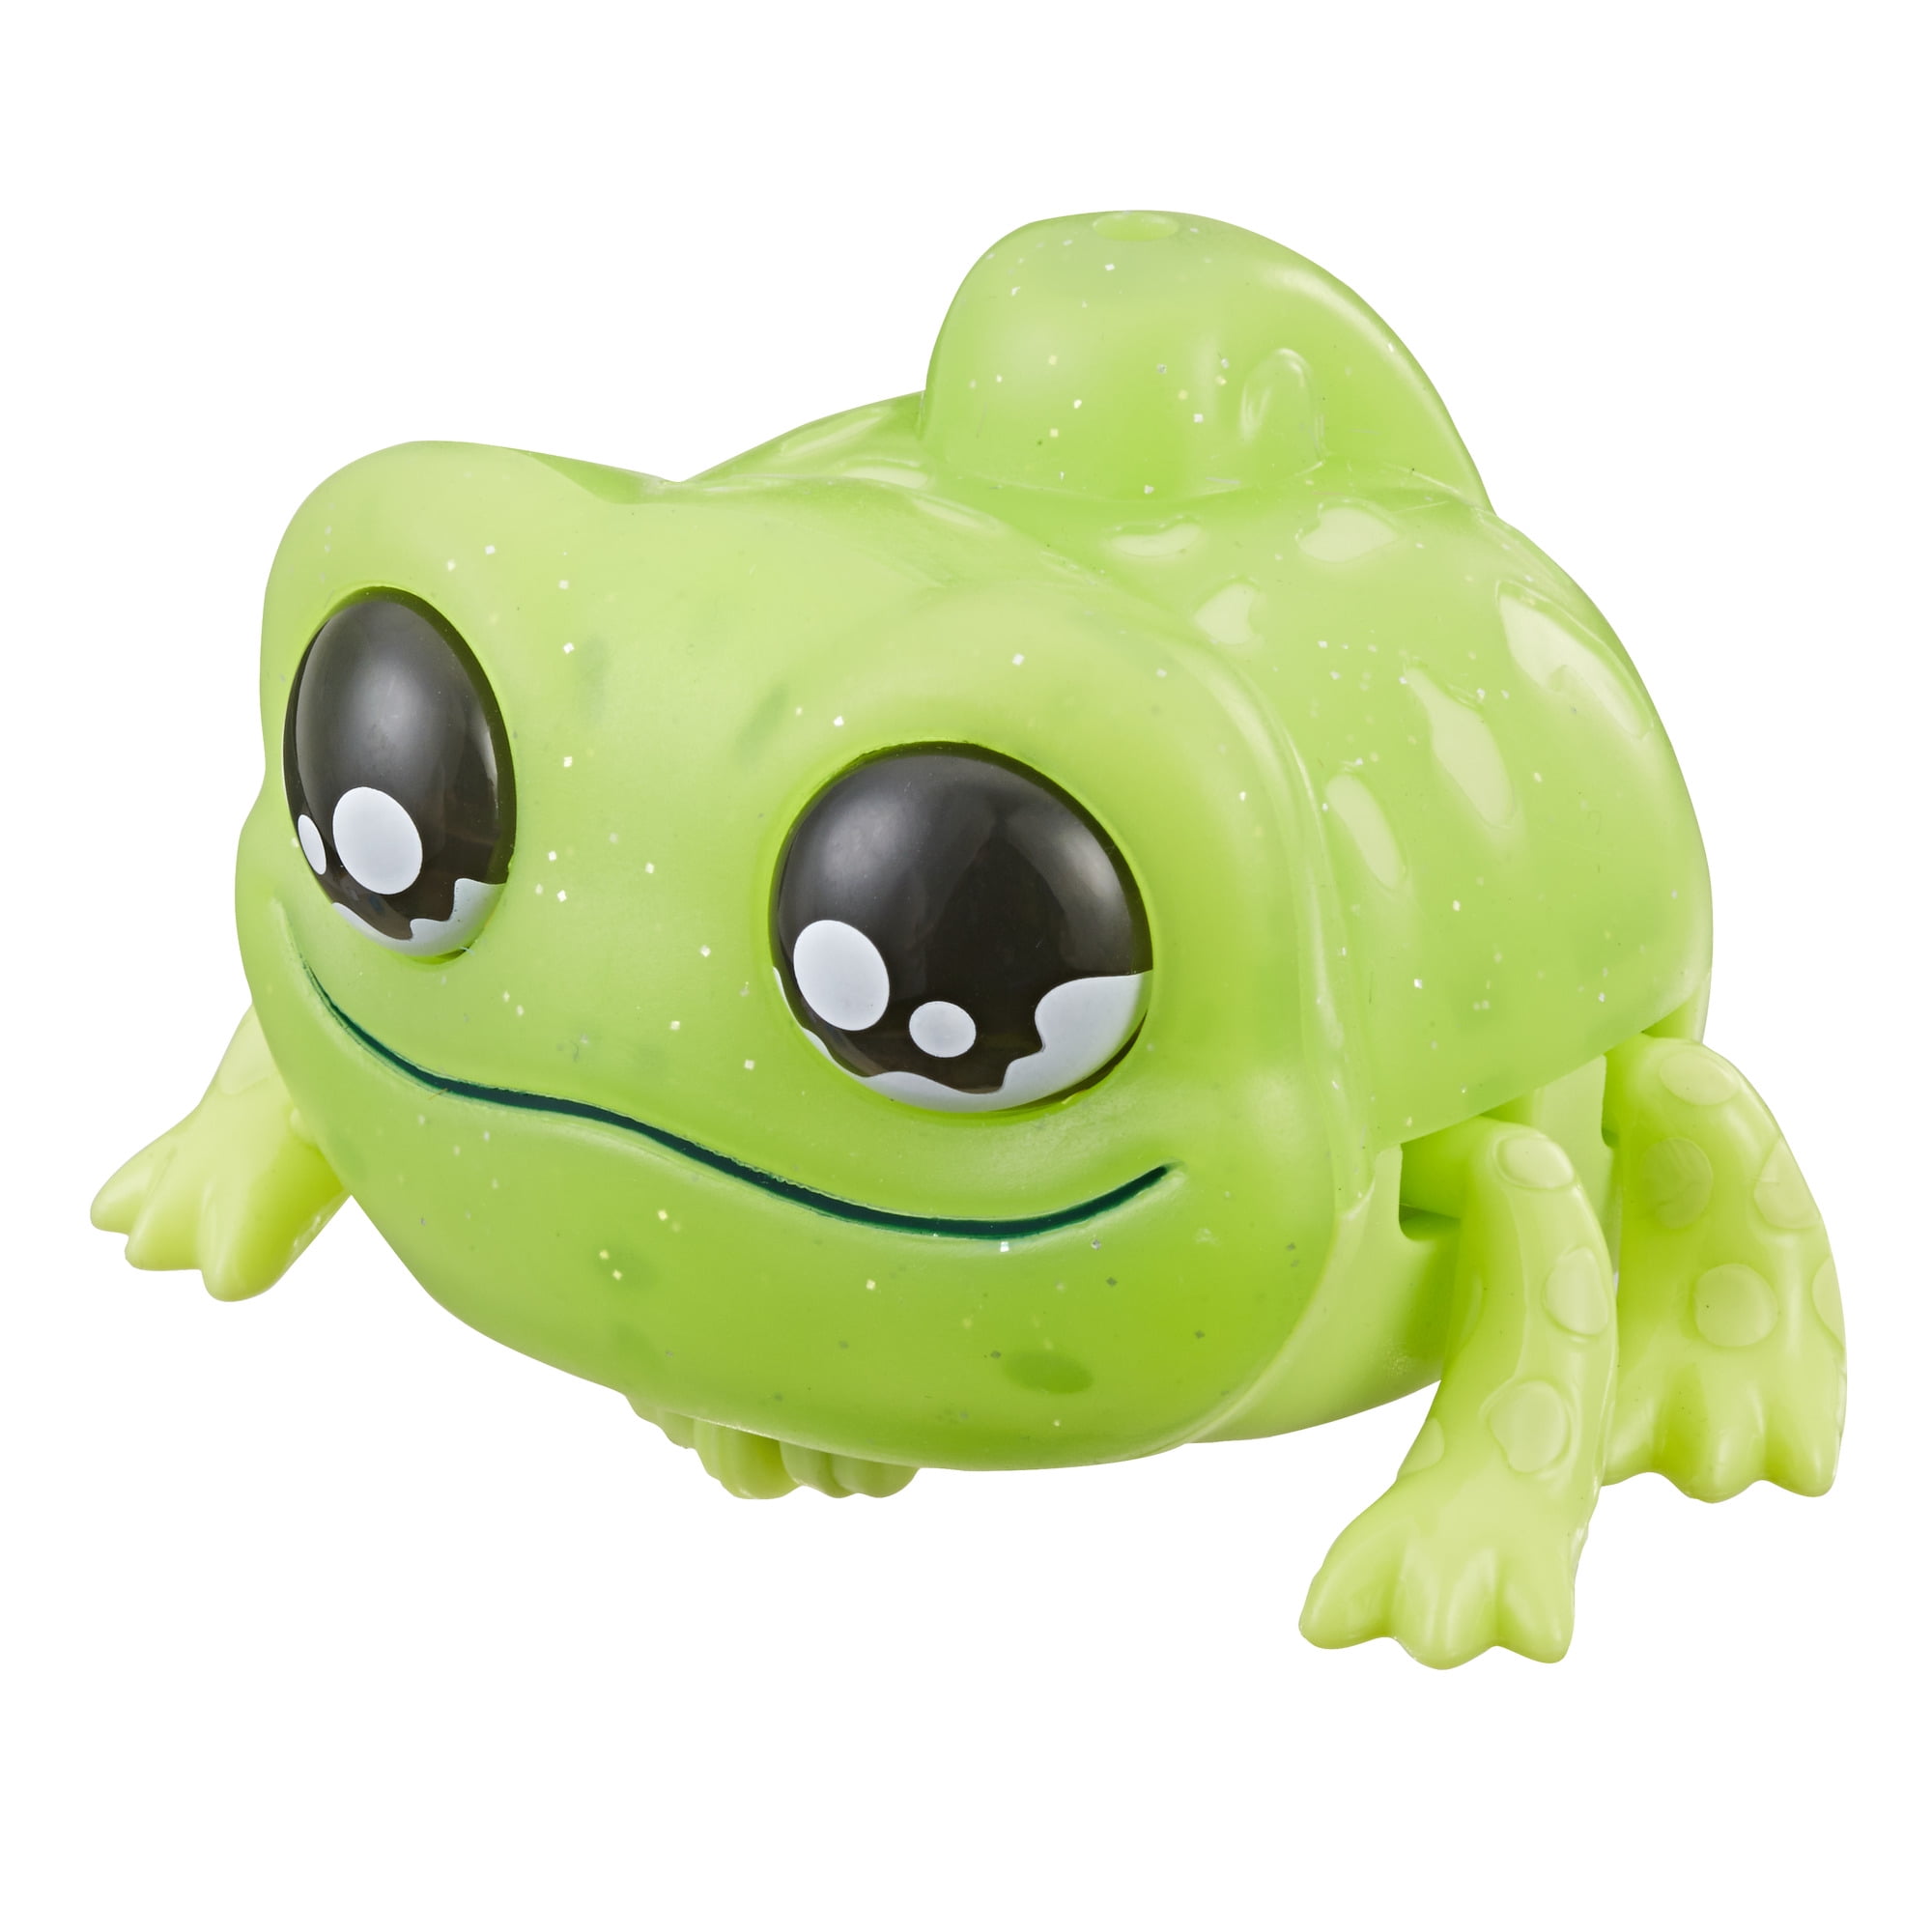 Hasbro Yellies Wiggly Wriggles Voice-activated Spider Pet Ages 5 and up for sale online 